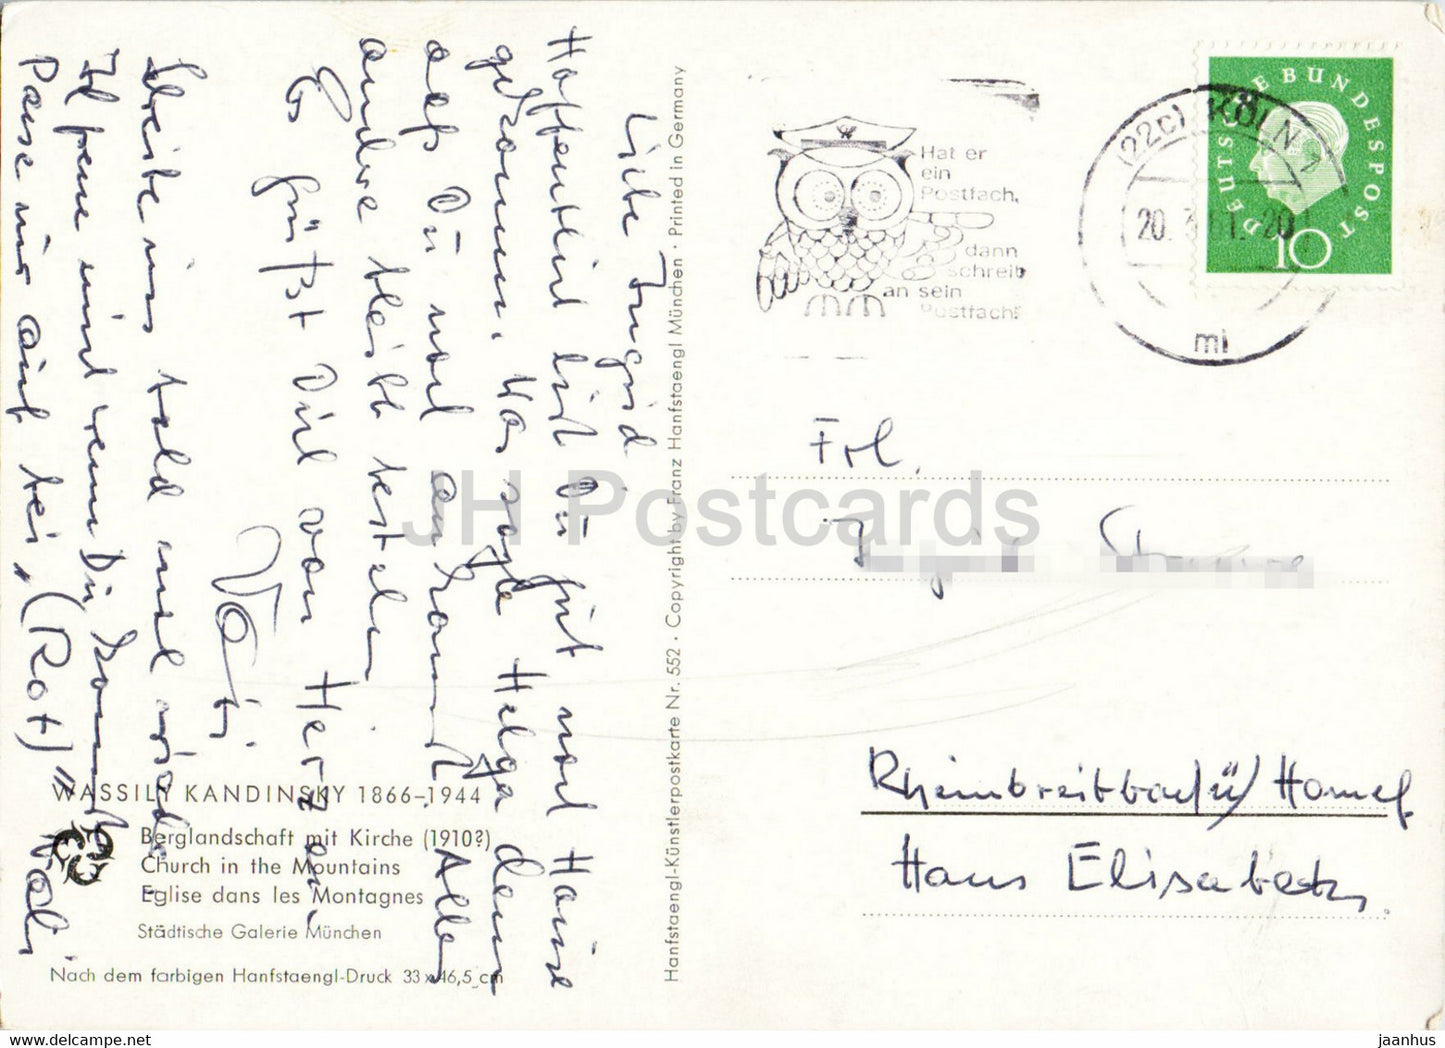 painting by Wassily Kandinsky - Berglandschaft mit Kirche - Russian art - old postcard - 1961 - Germany - used